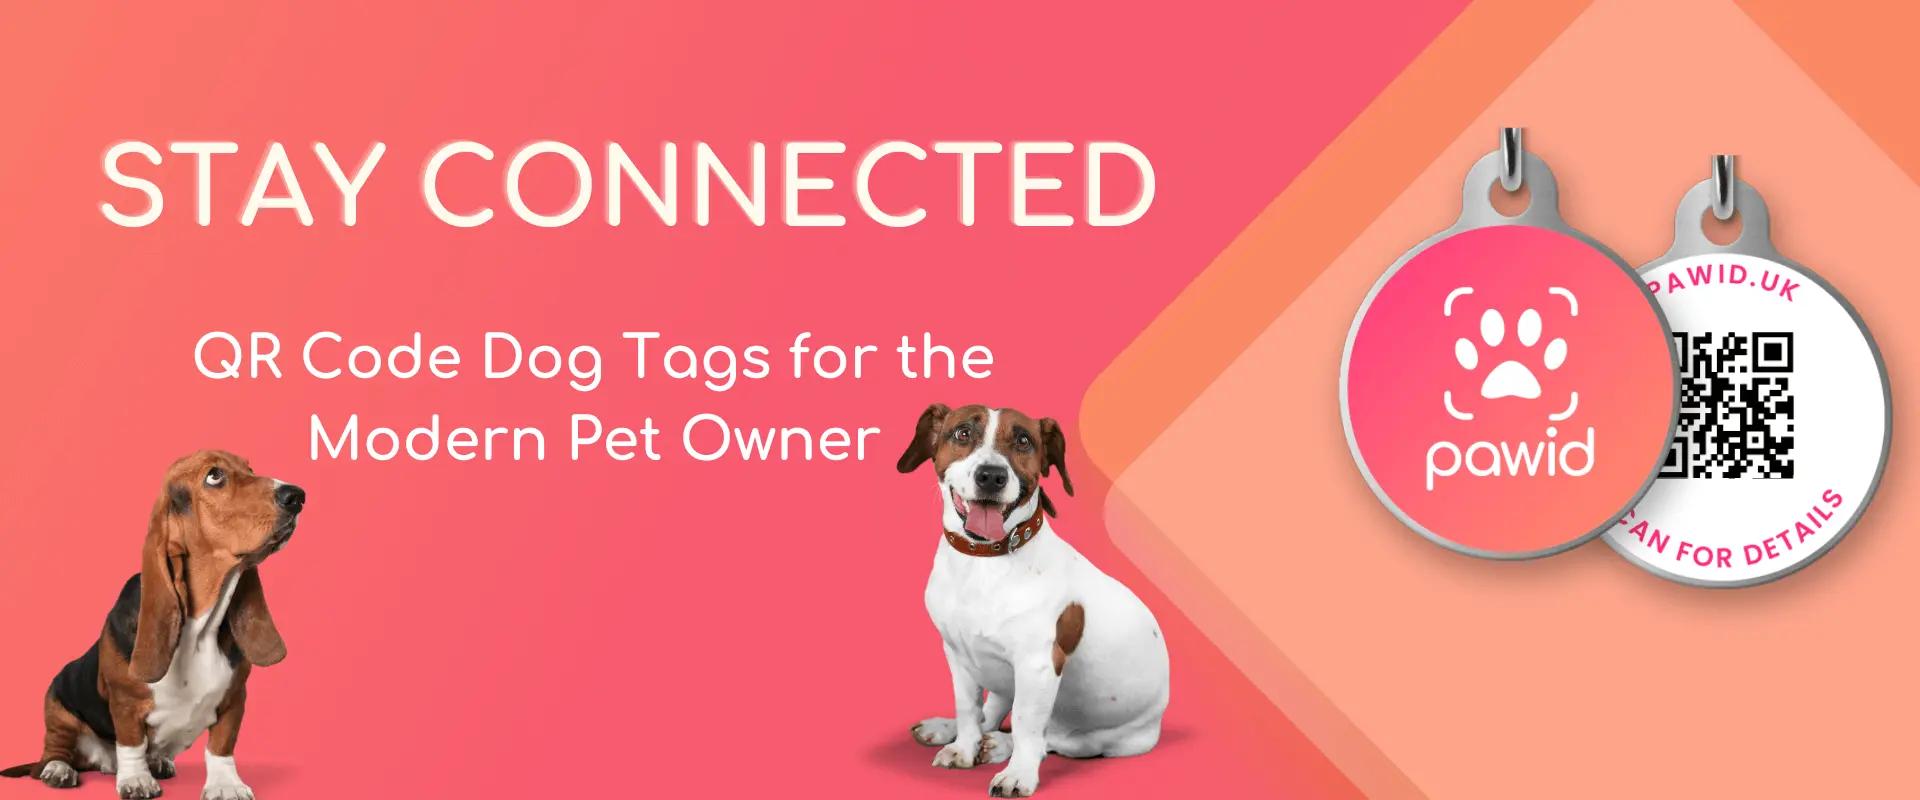 Stay Connected: QR Code Dog Tags for the Modern Pet Owner